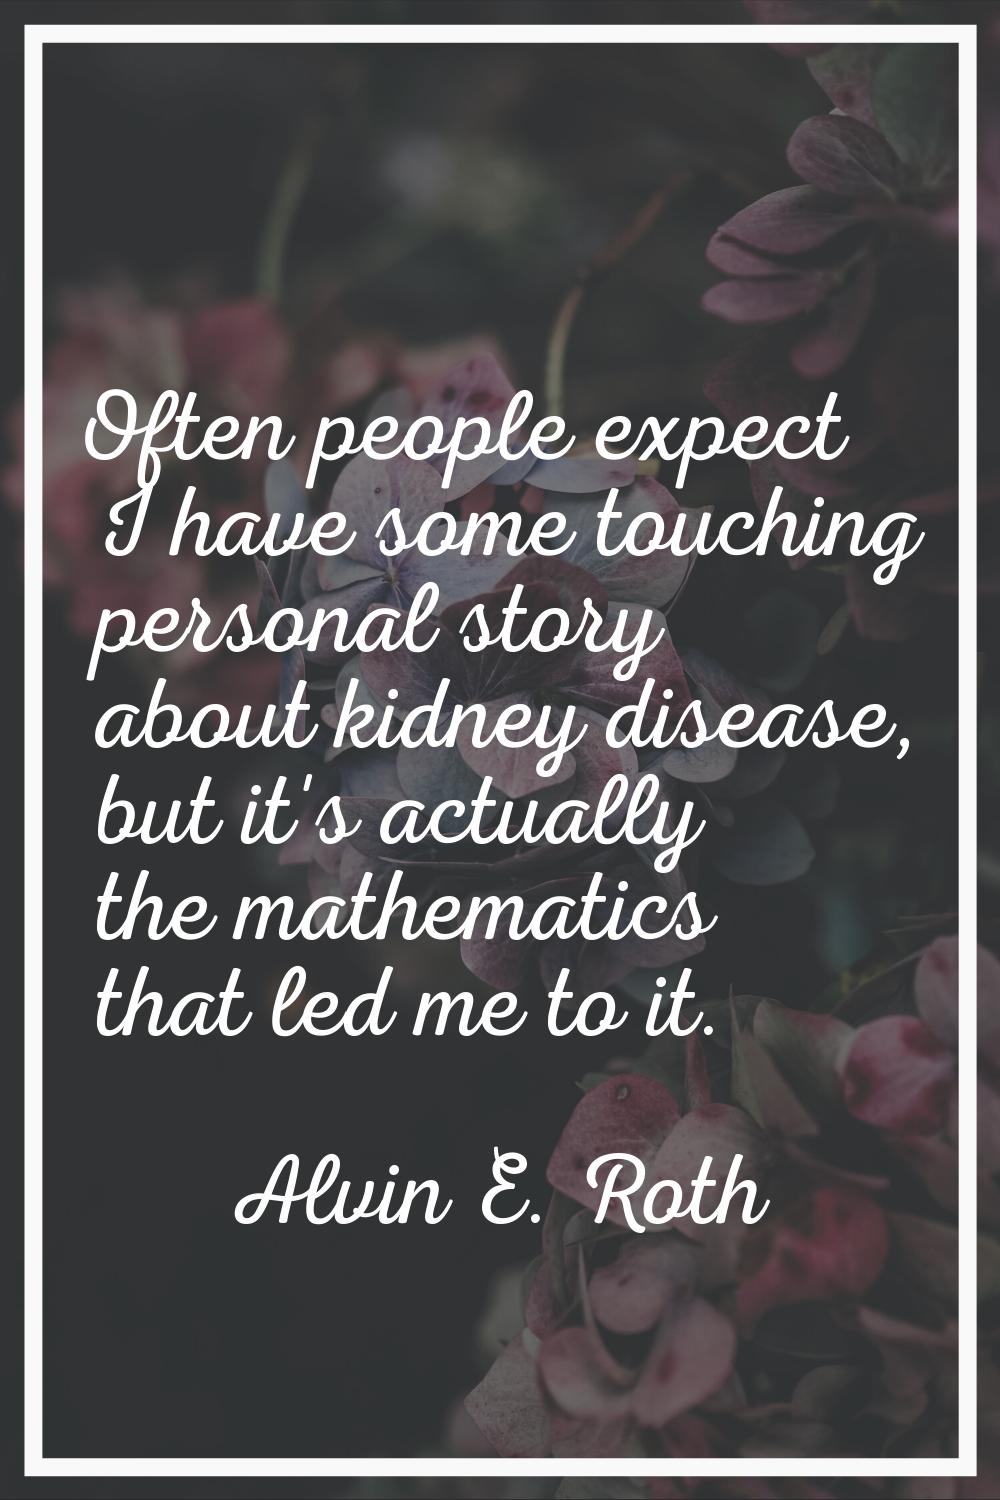 Often people expect I have some touching personal story about kidney disease, but it's actually the